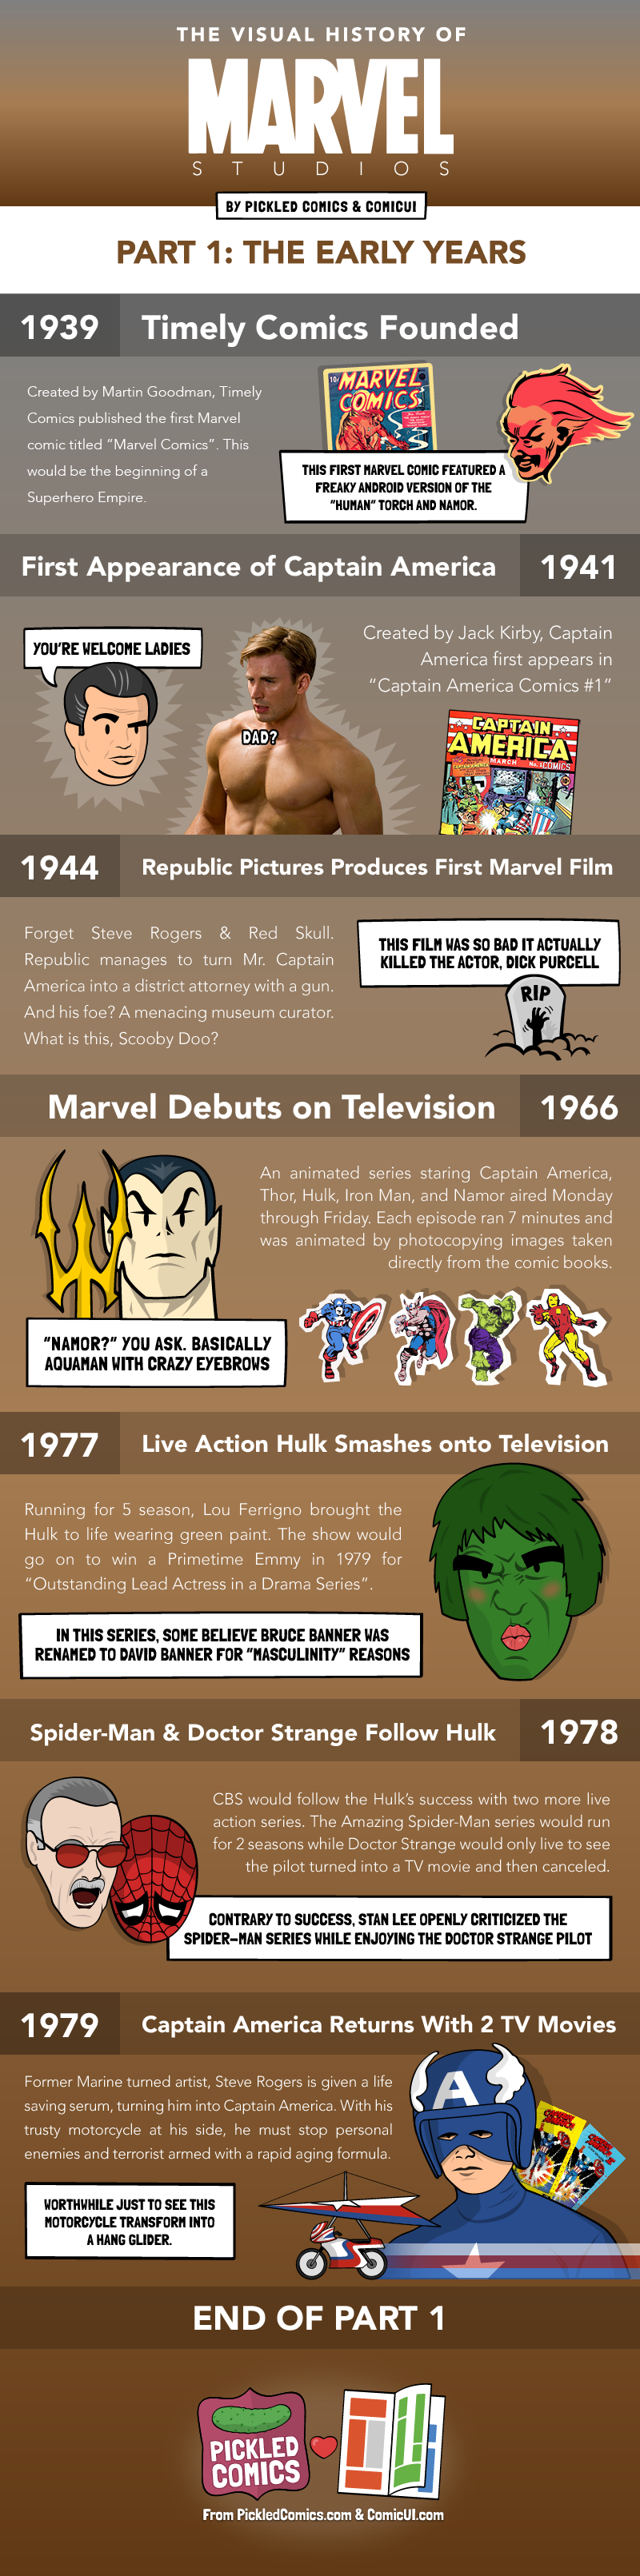 The Visual History Of Marvel Studios. Part 1 starts in 1939 with Timely Comics and ends in 1979 with two Captain America TV Movies.